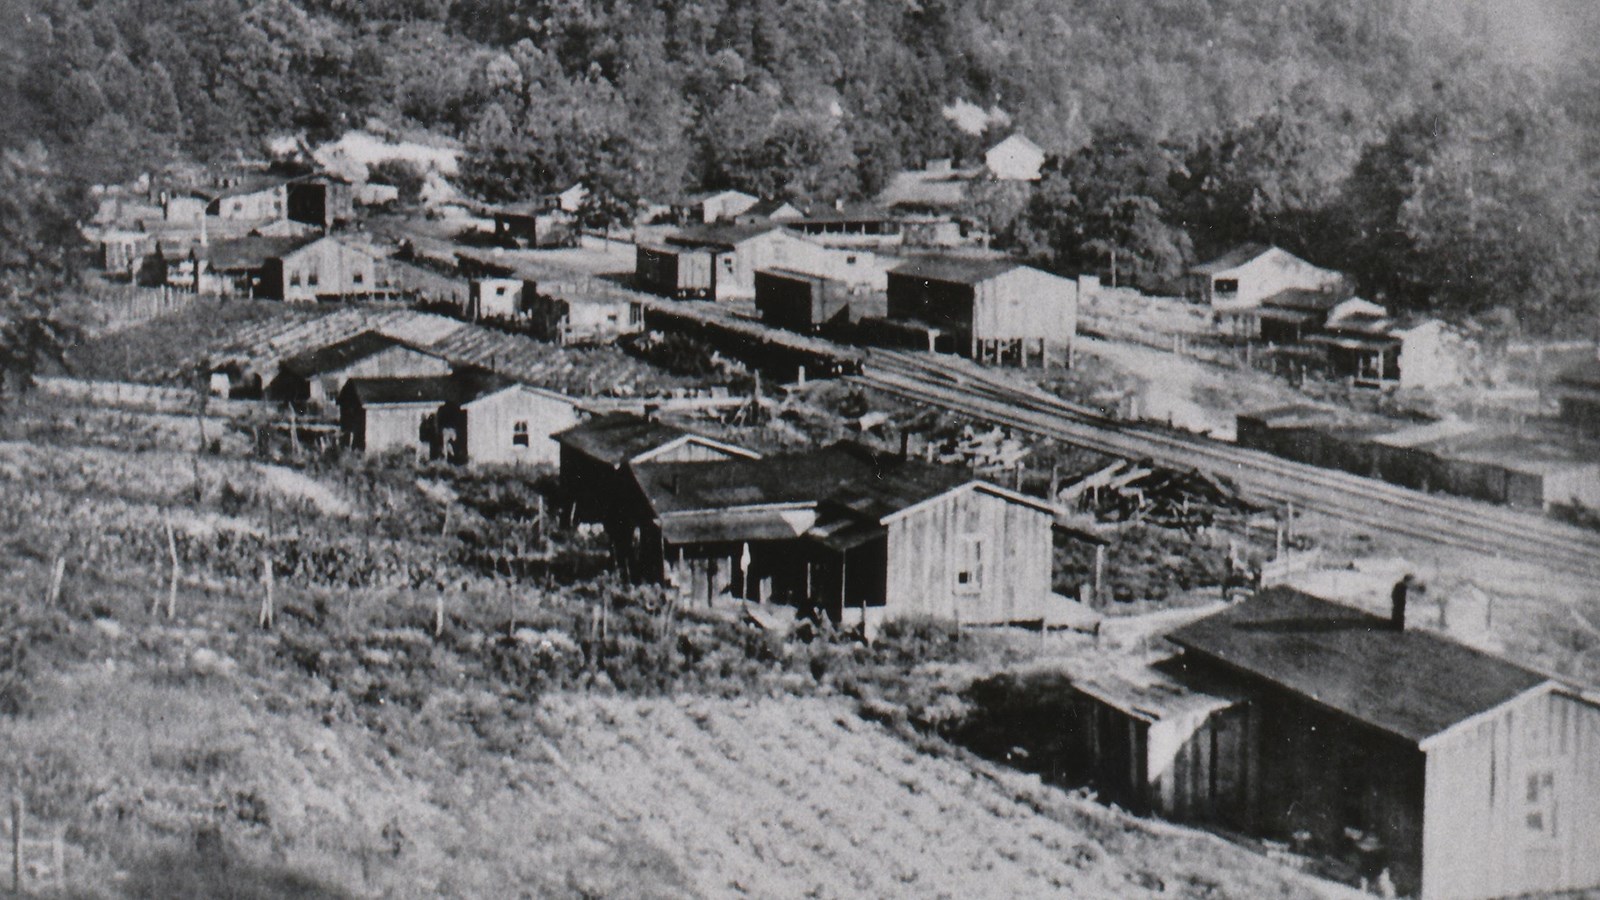 Black and white image of the historic town of Elkmont.